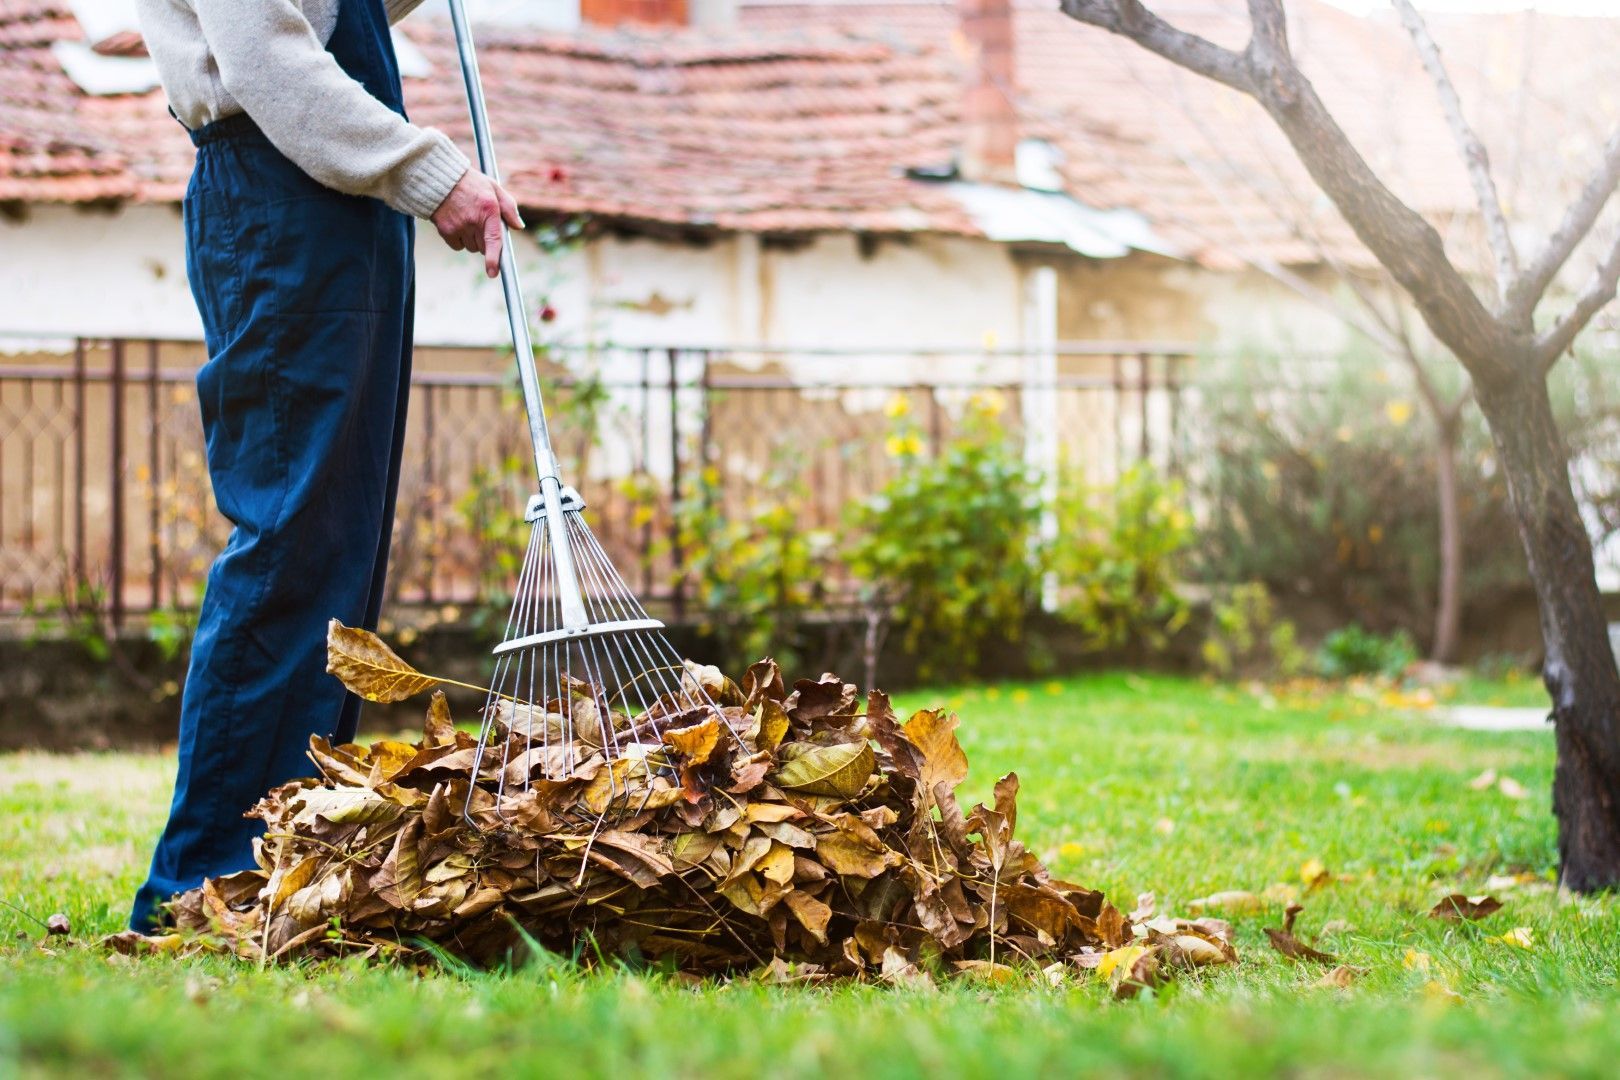 A picture of a pile of fall leaves with a bag and rake.